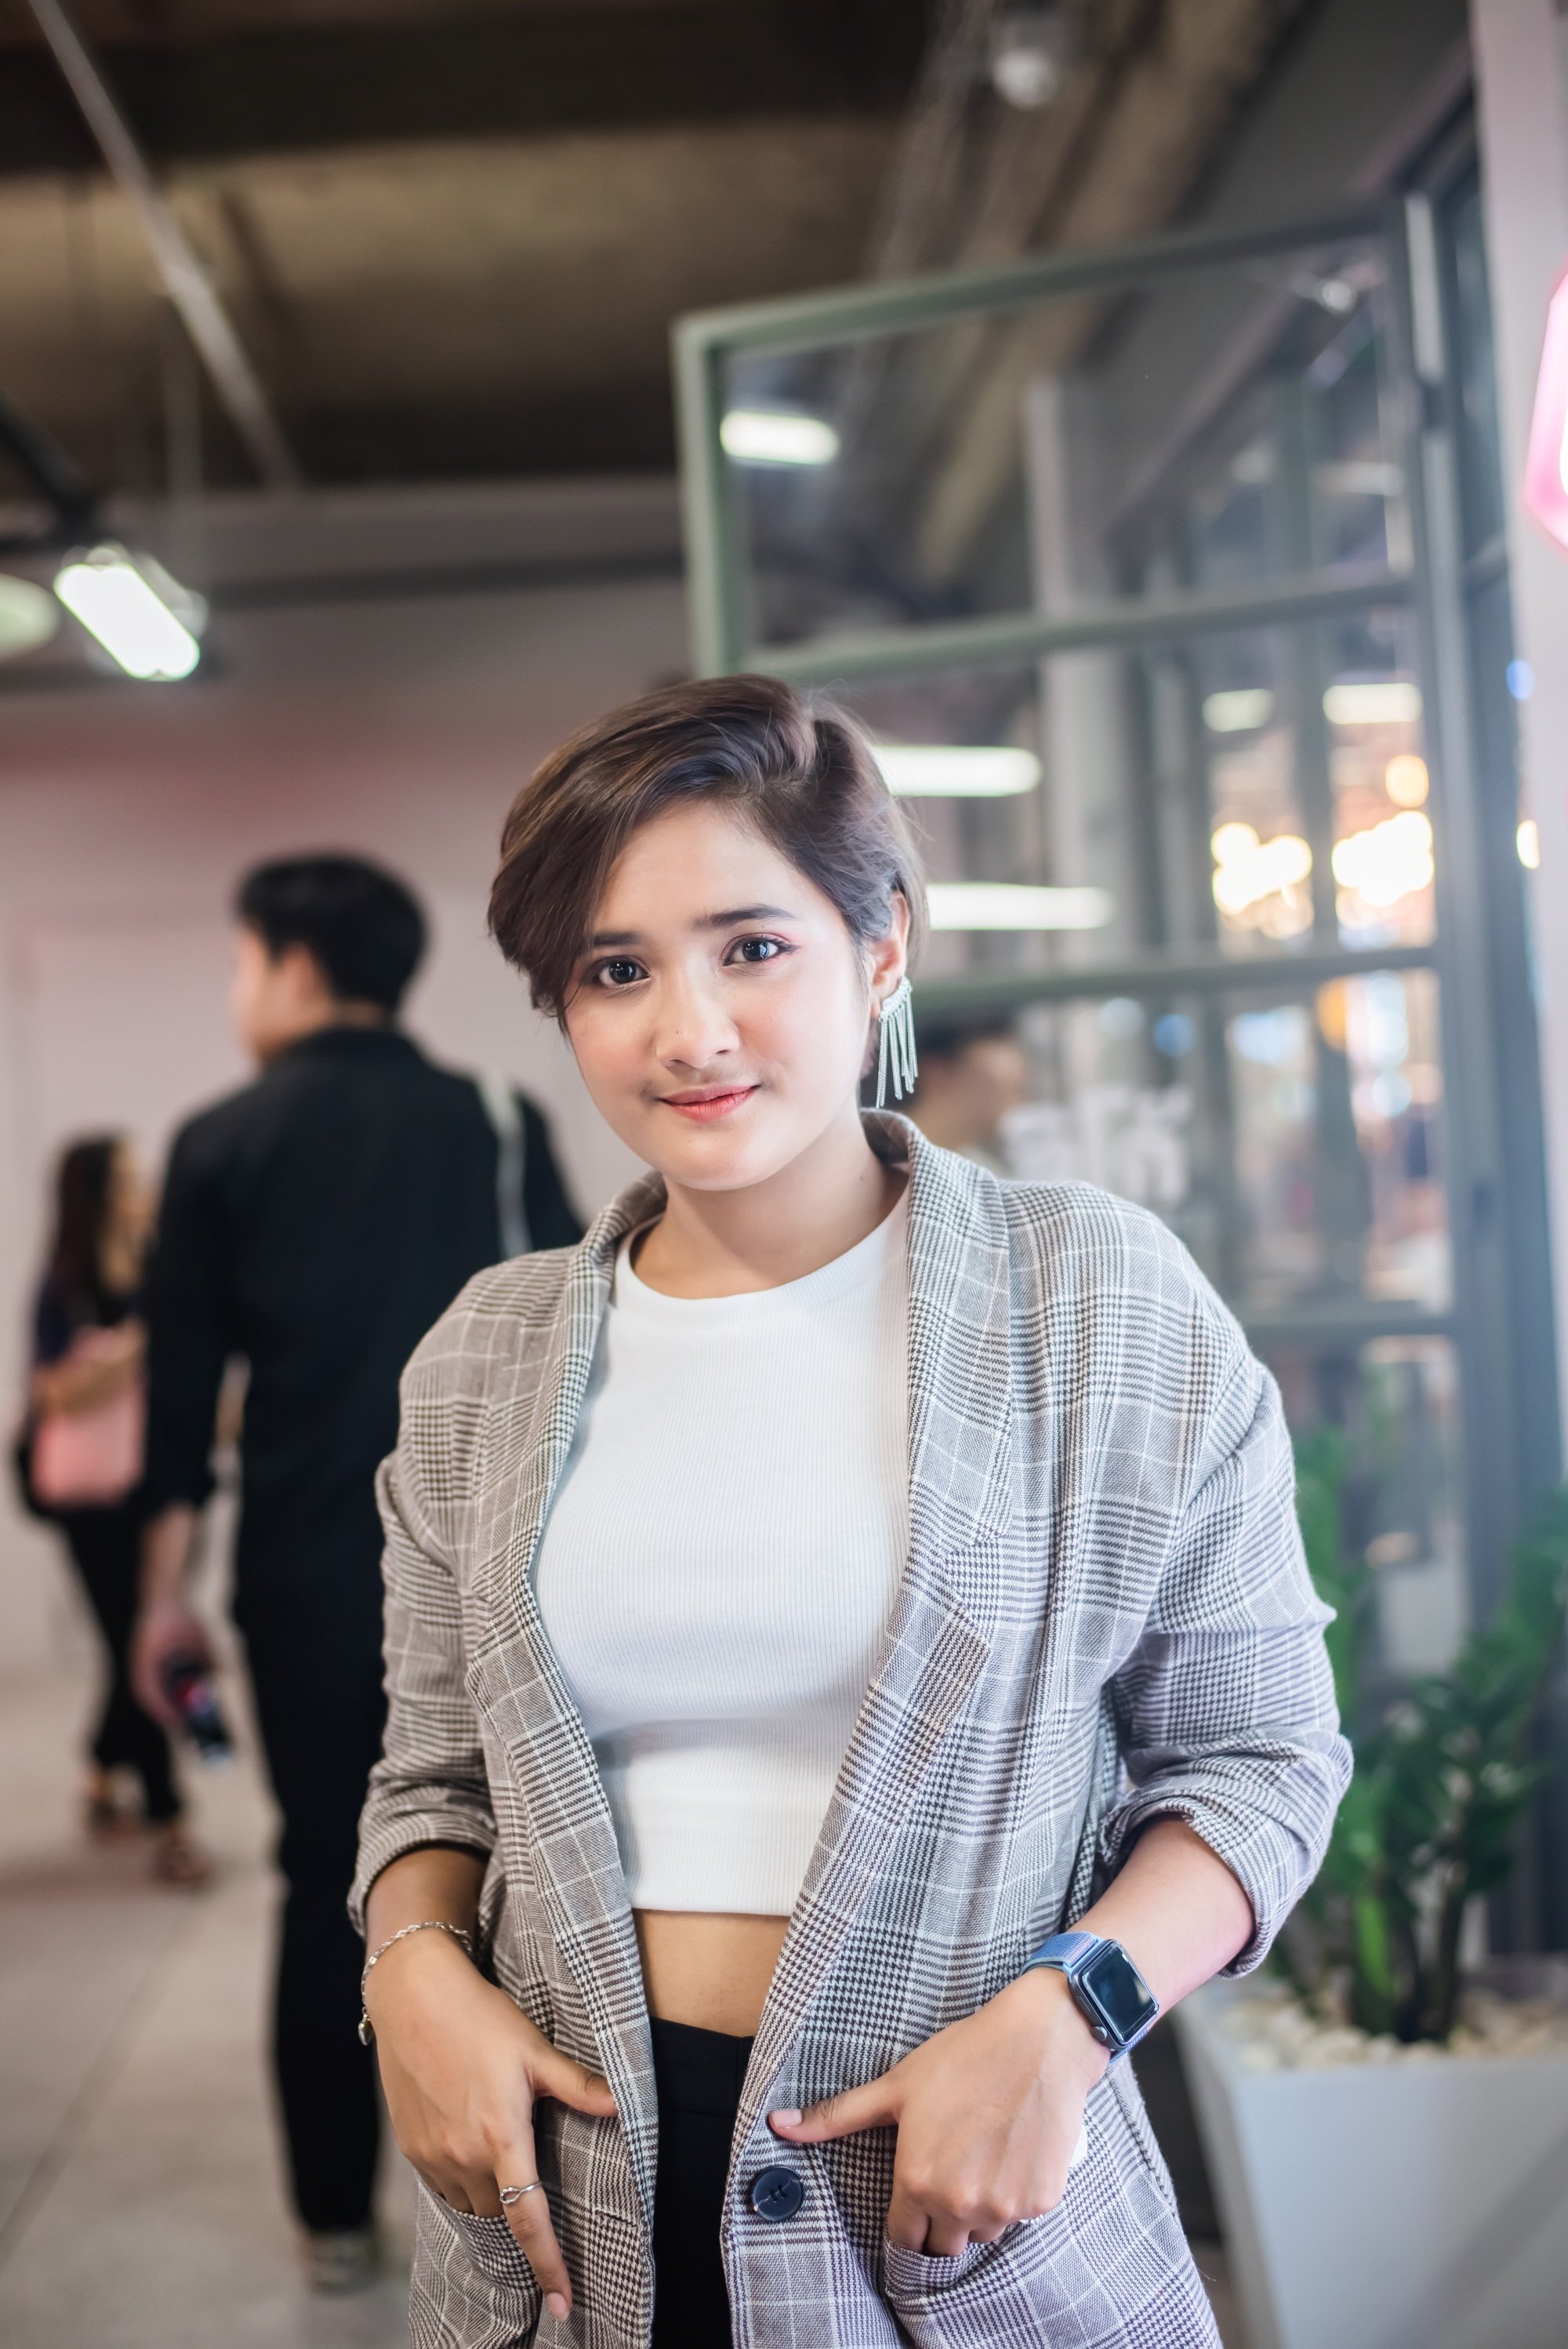 Asian woman with short hair for round face wearing a gray cardigan